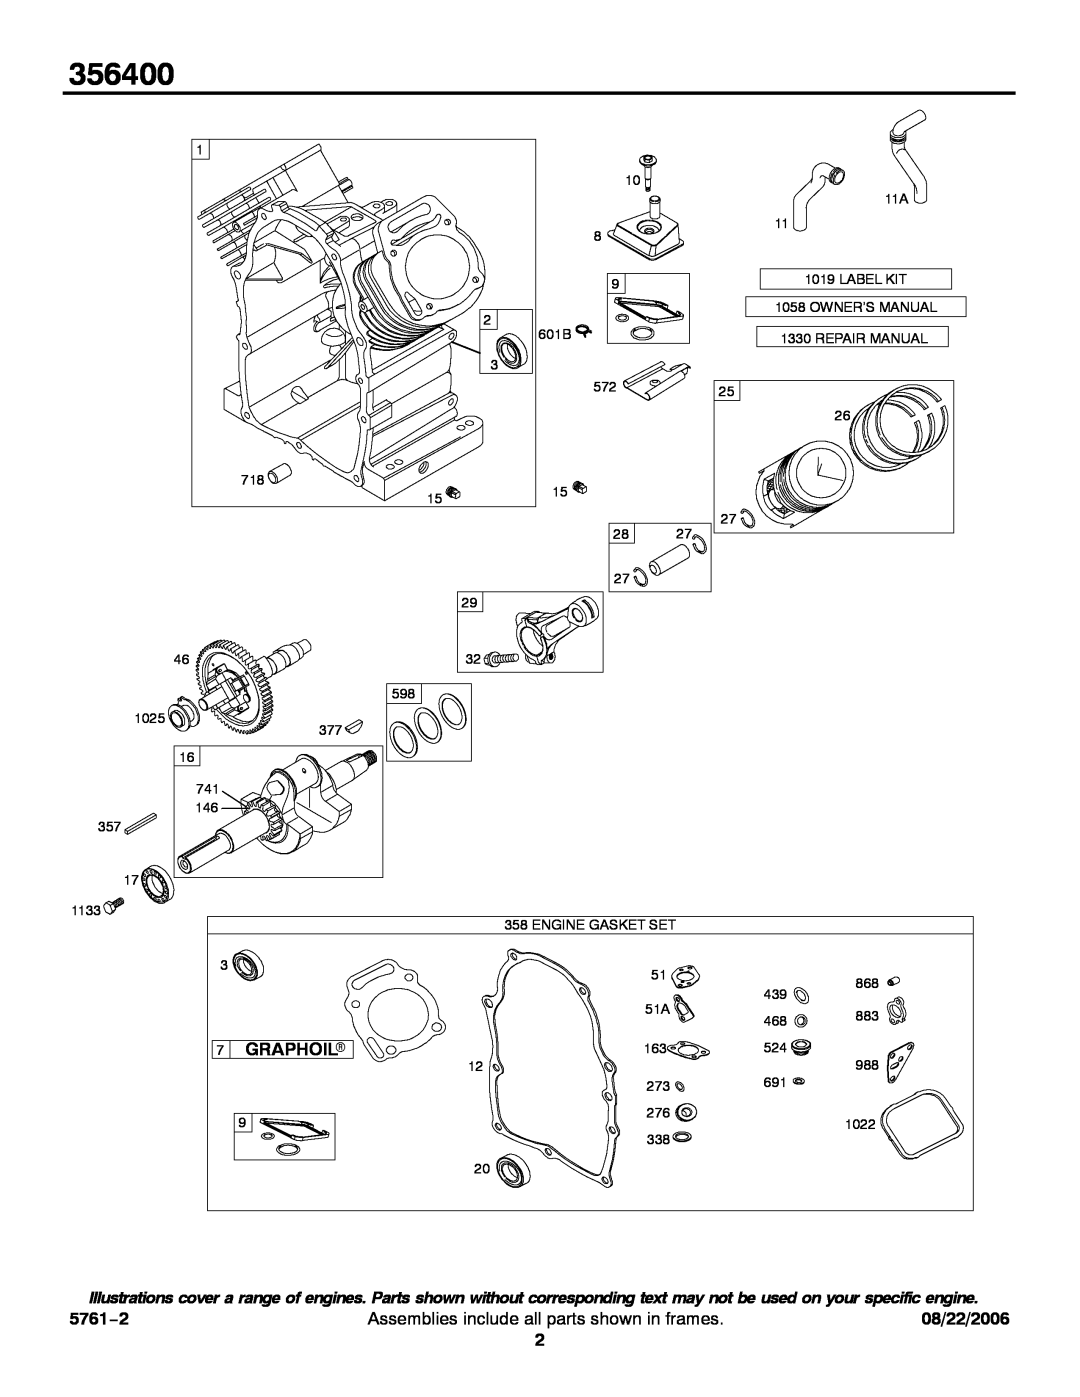 Briggs & Stratton 356400 service manual Graphoilr, 5761−2, Assemblies include all parts shown in frames, 08/22/2006 